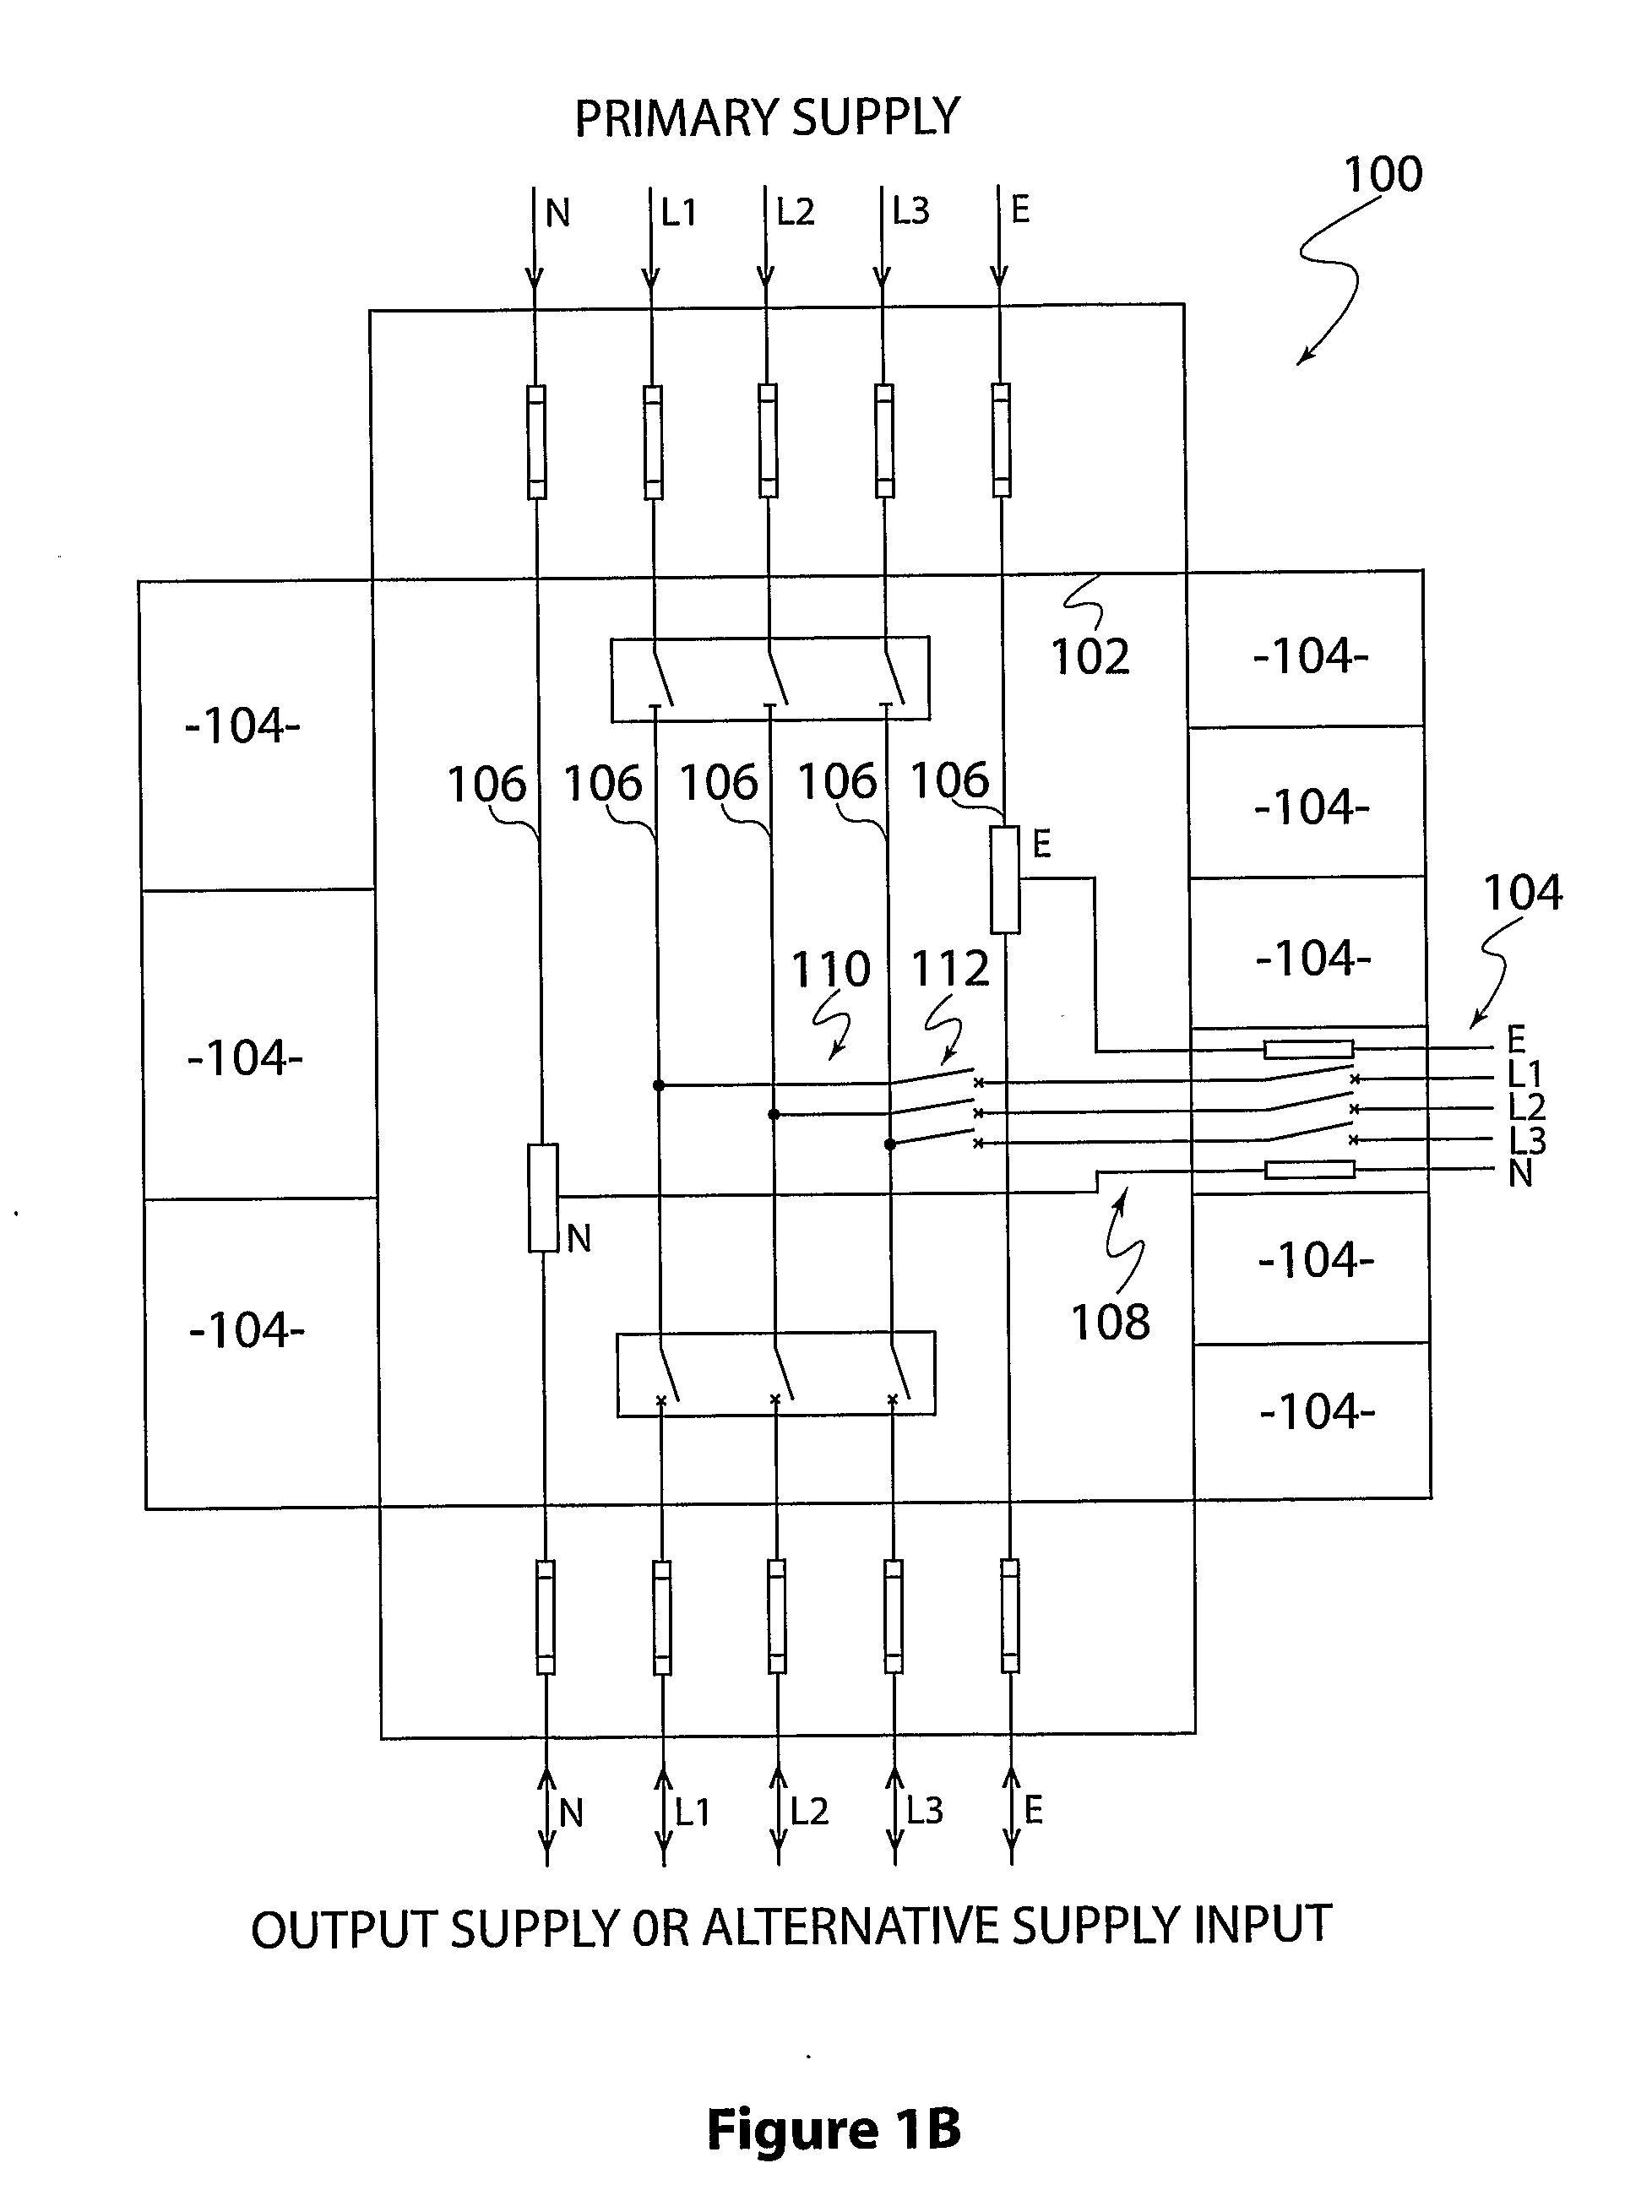 Power distribution system with individually isolatable functional zones